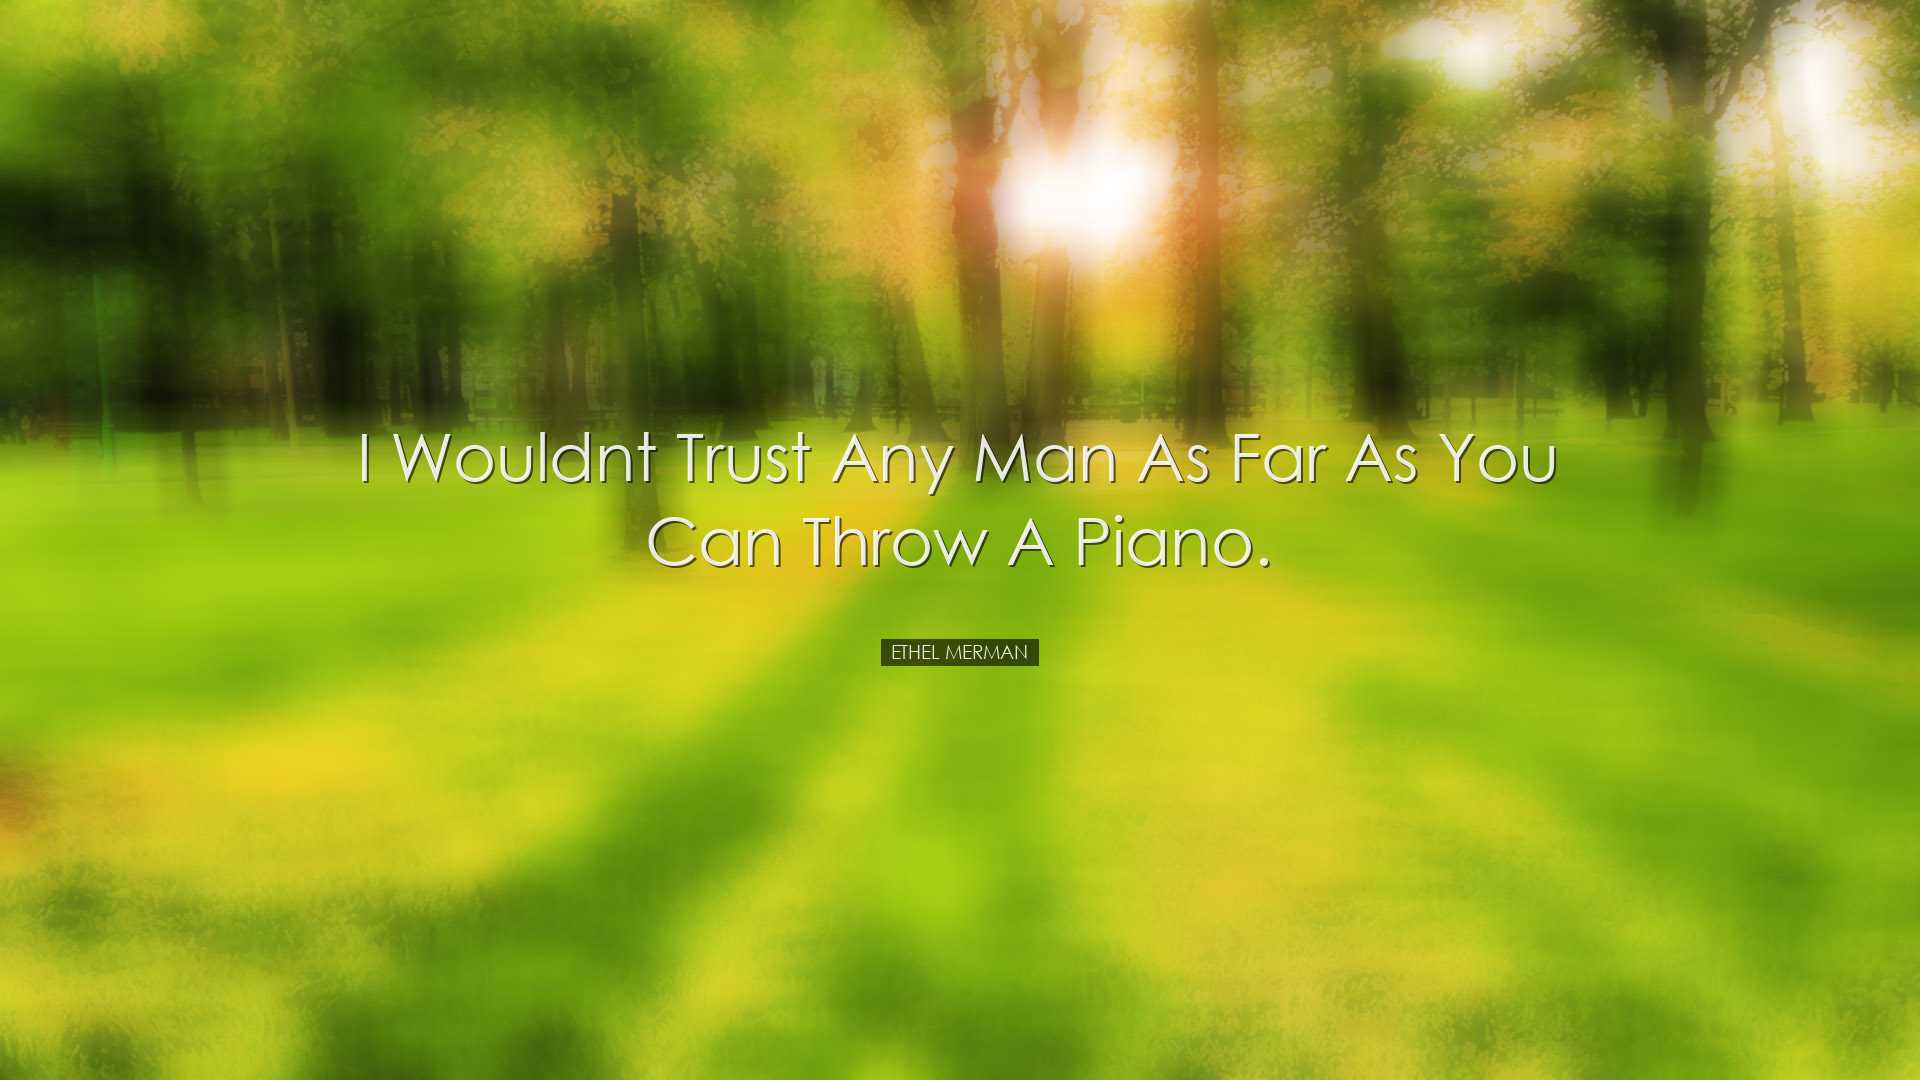 I wouldnt trust any man as far as you can throw a piano. - Ethel M